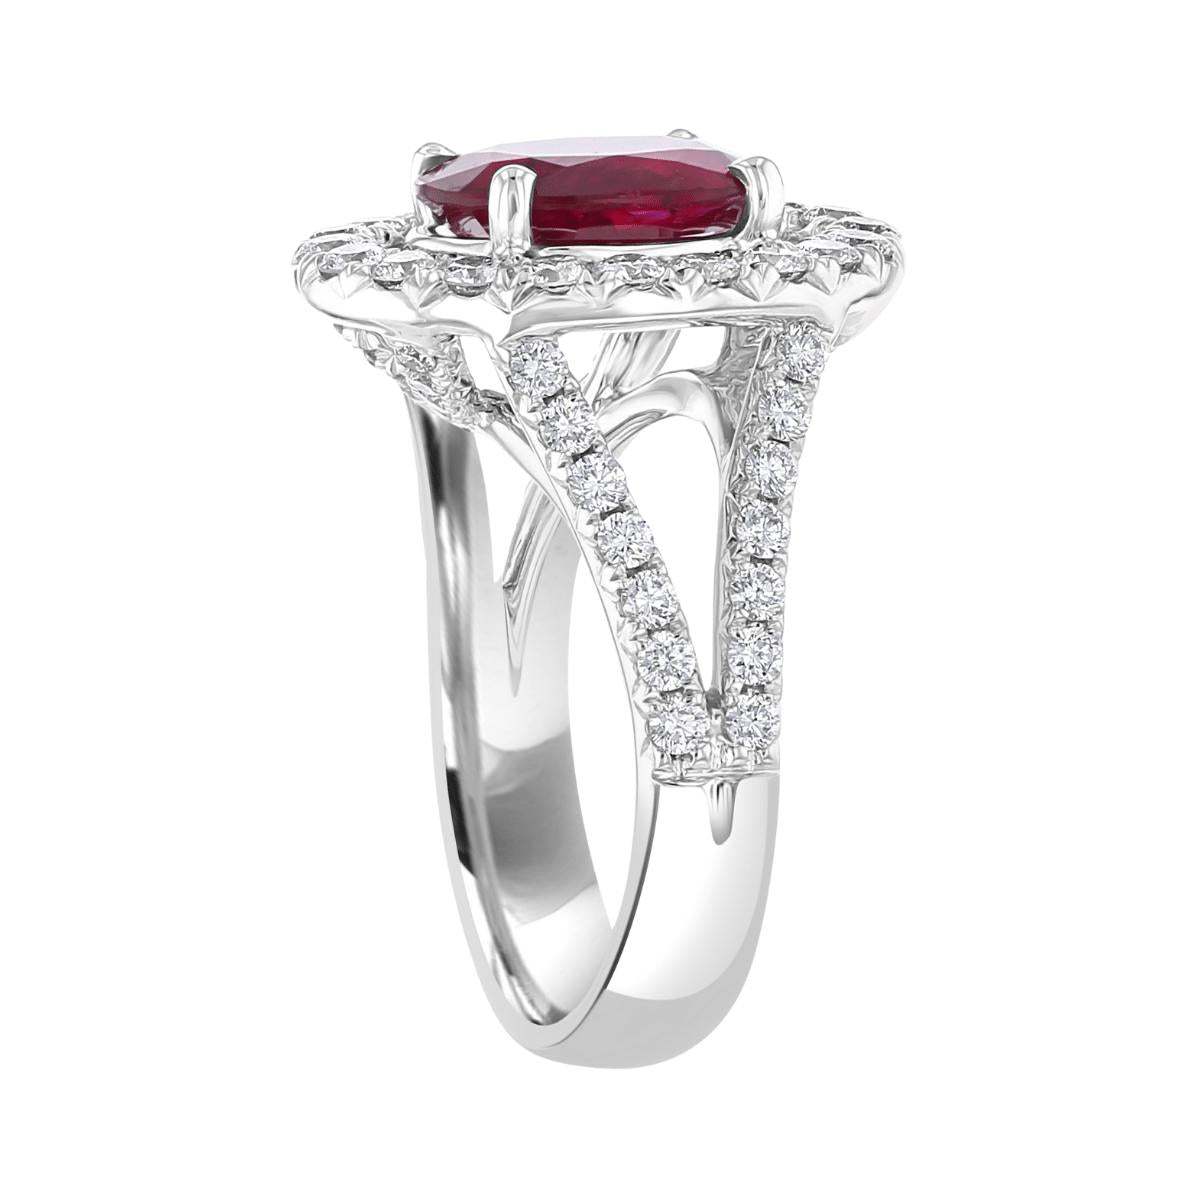 18KT GOLD 3.03 CT RUBY & 1.65 CTW DIAMOND OVAL HALO RING 4,4.5,5,5.5,6,6.5,7,7.5,8,8.5,9